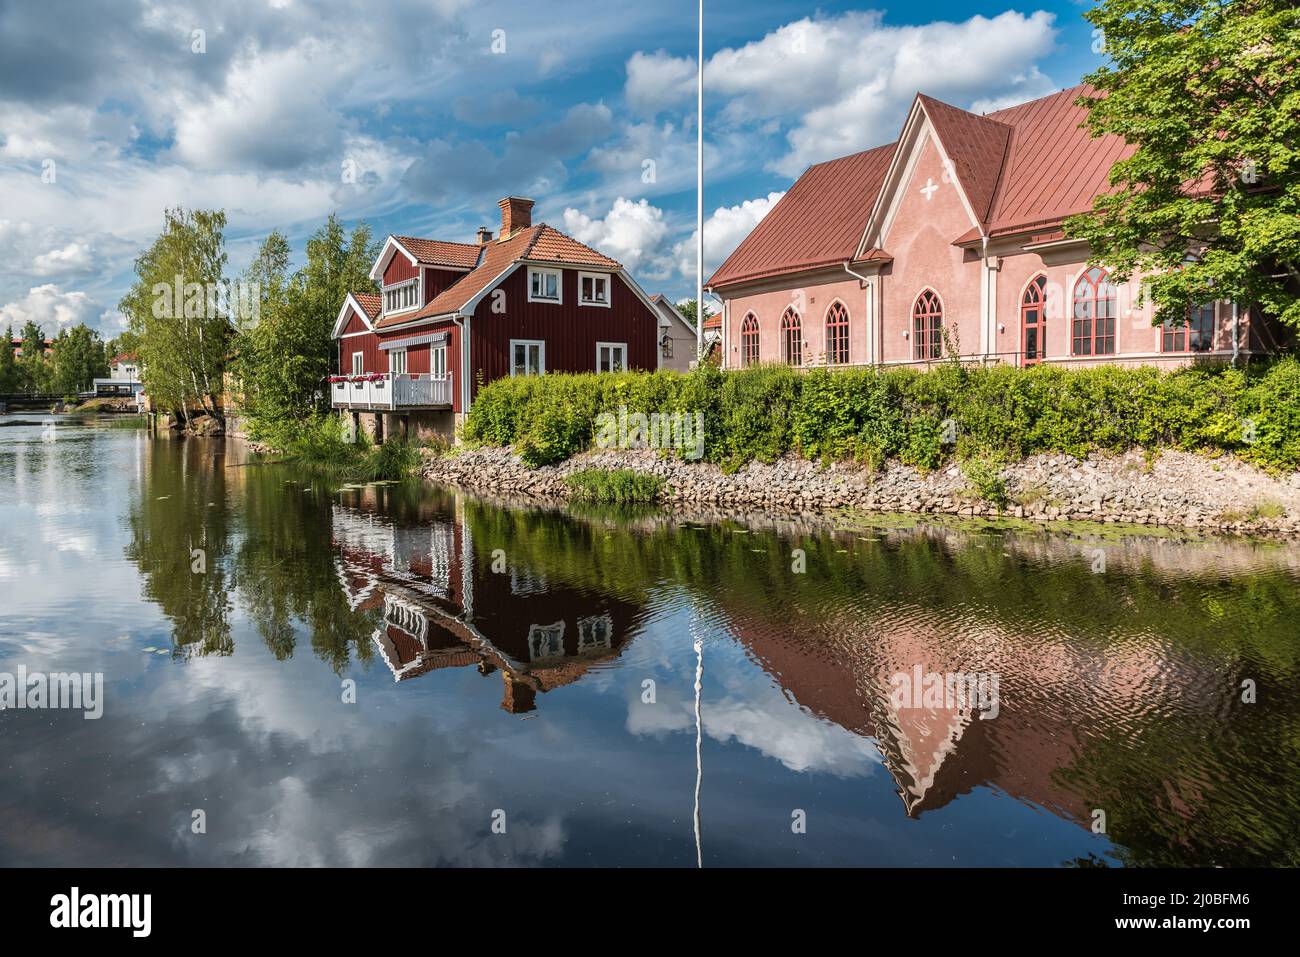 Falun, Dalarna - Sweden - 08 05 2019 Panoramic view of the city reflecting in the Nybron river Stock Photo